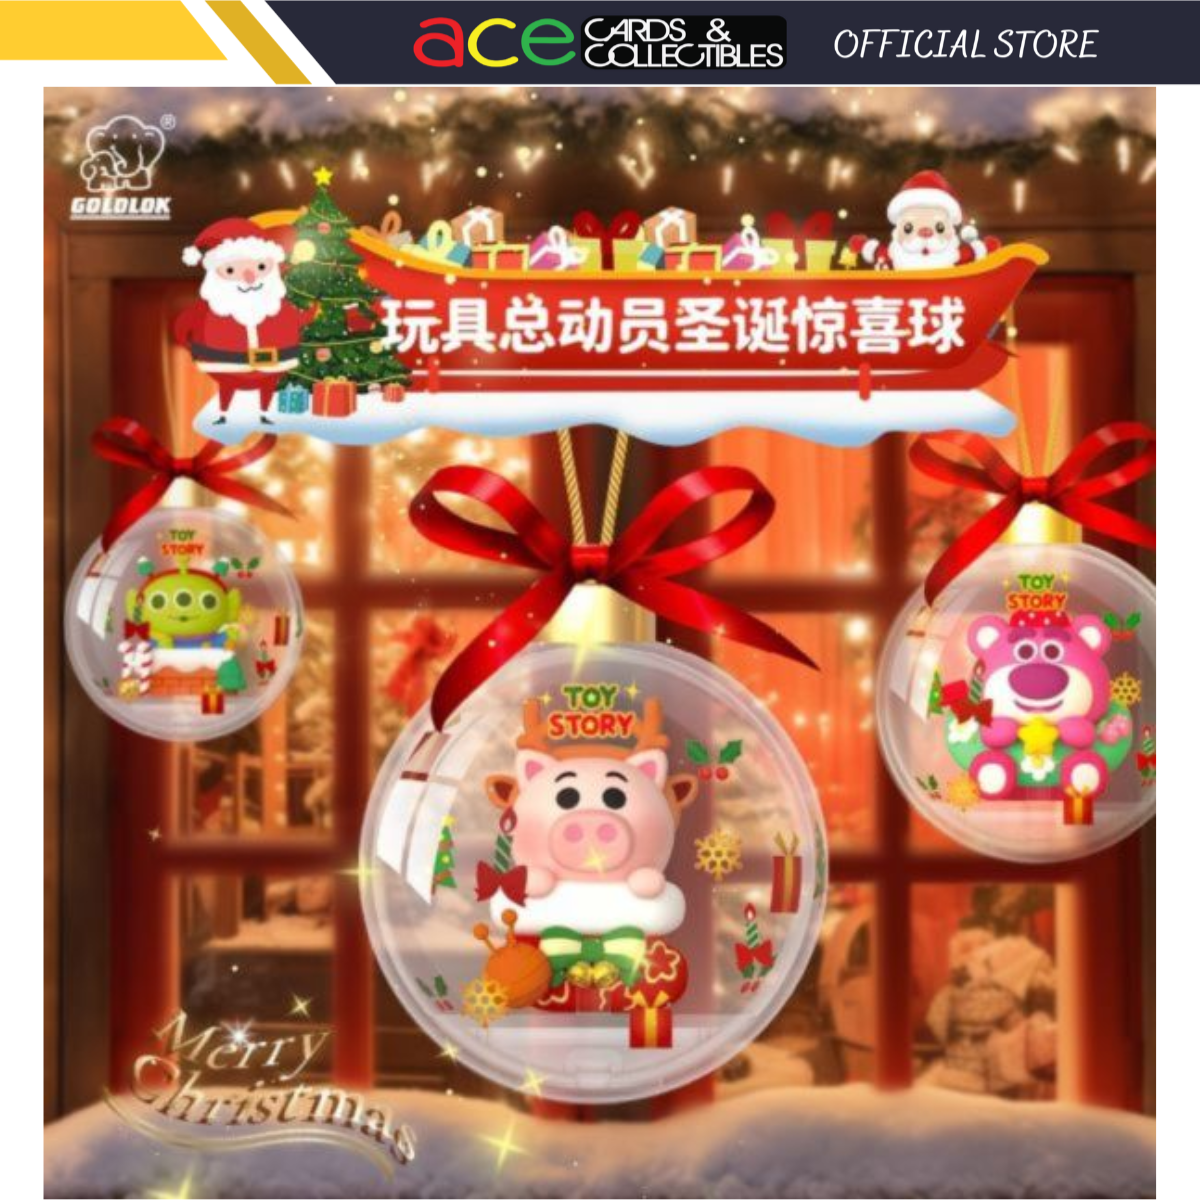 Toy Story Christmas Suprise Ball Series-Single Box (Random)-GOLDLOK-Ace Cards & Collectibles